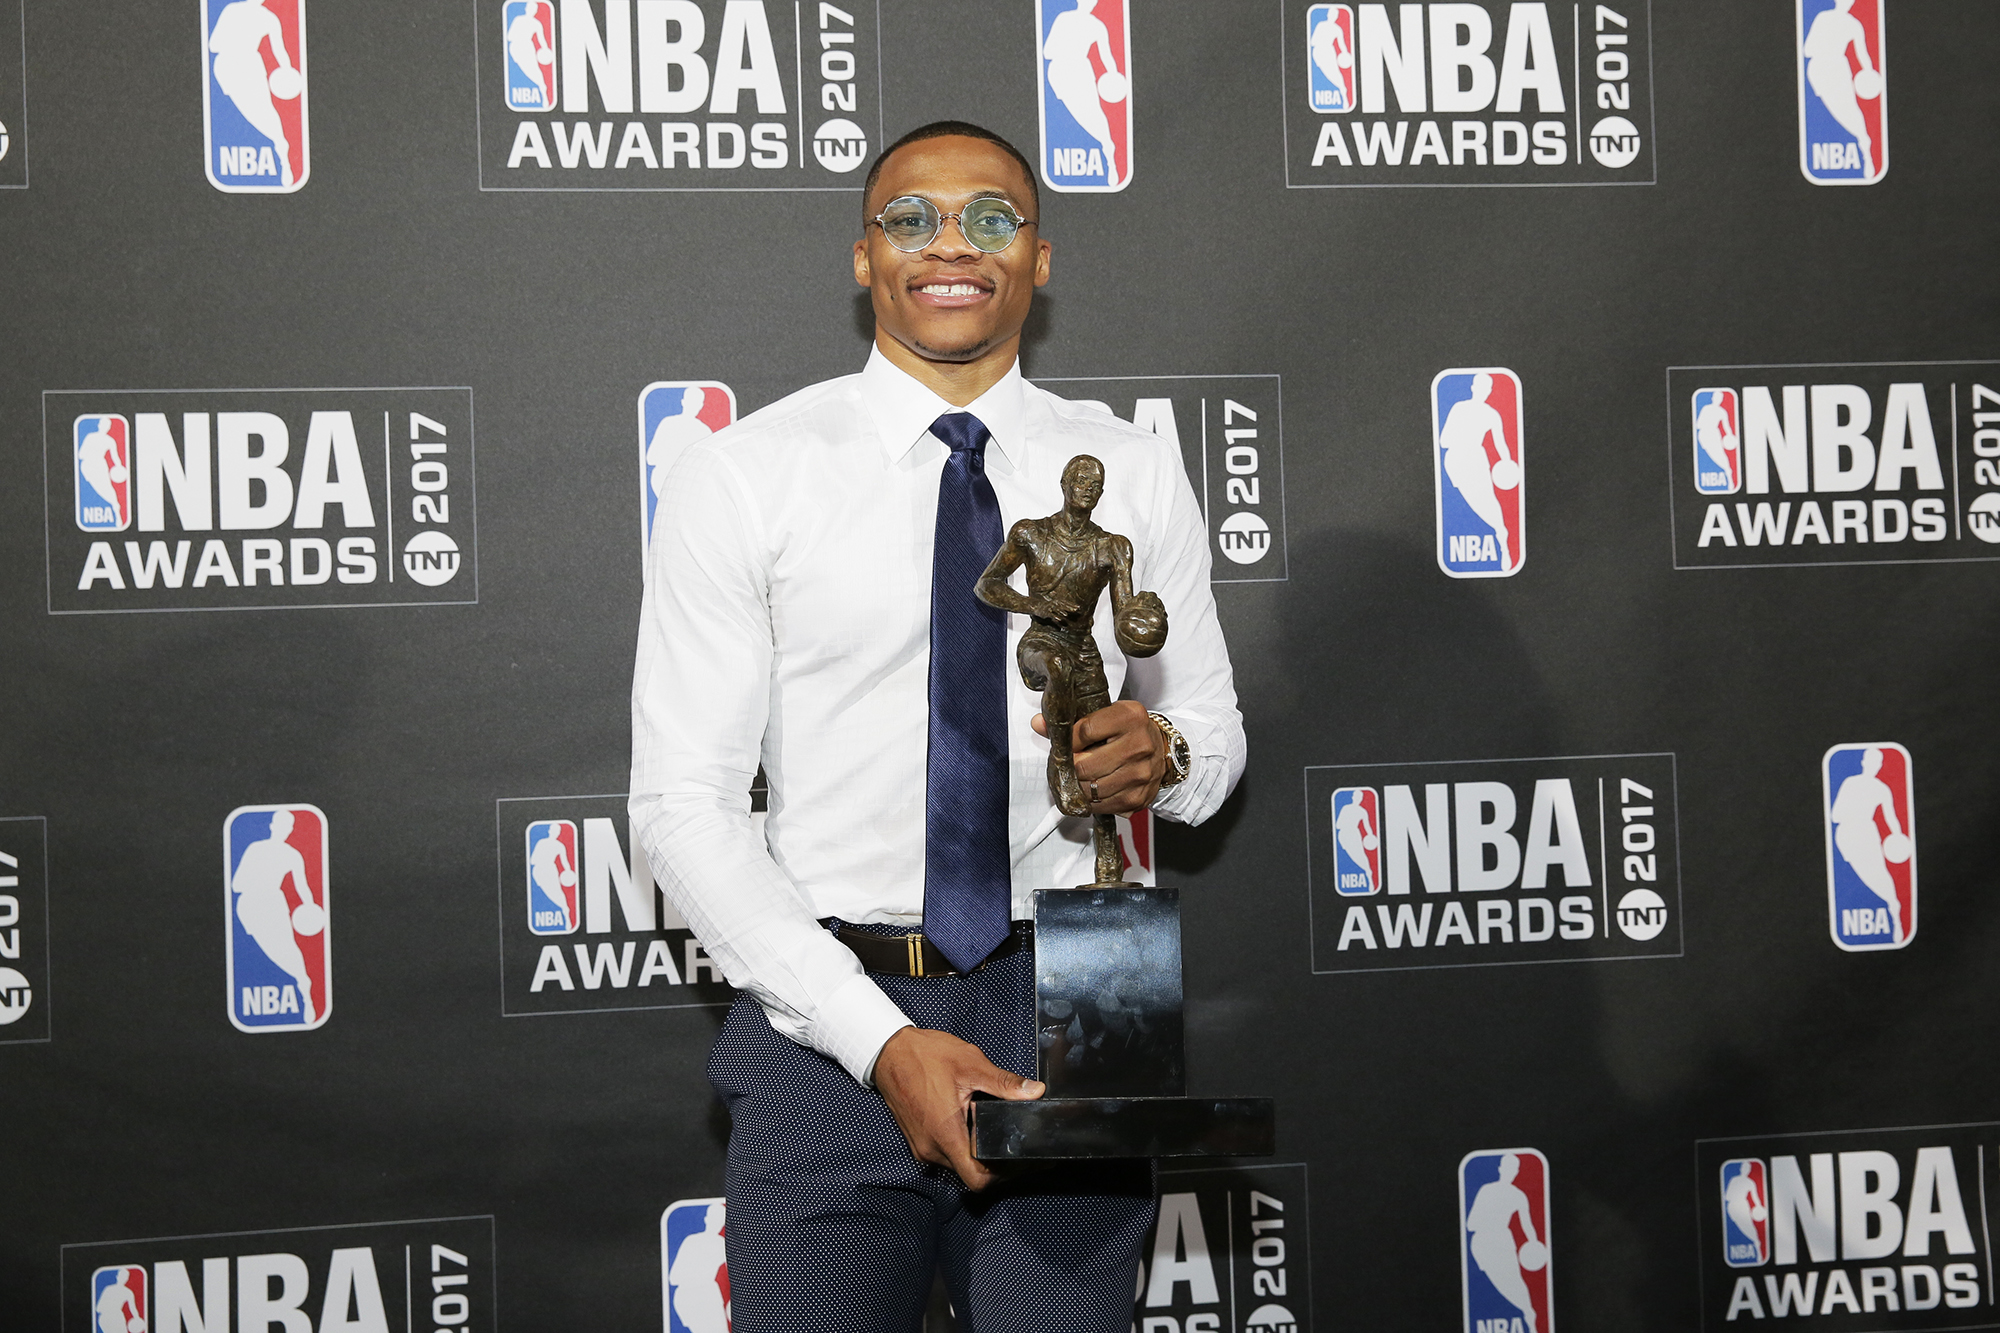 Russell Westbrook of the Oklahoma City Thunder after winning the Most Valuable Player of the Year award at the 2017 NBA Awards Show, on June 26, 2017 in New York City. (Steven Freeman—NBAE/Getty Images)